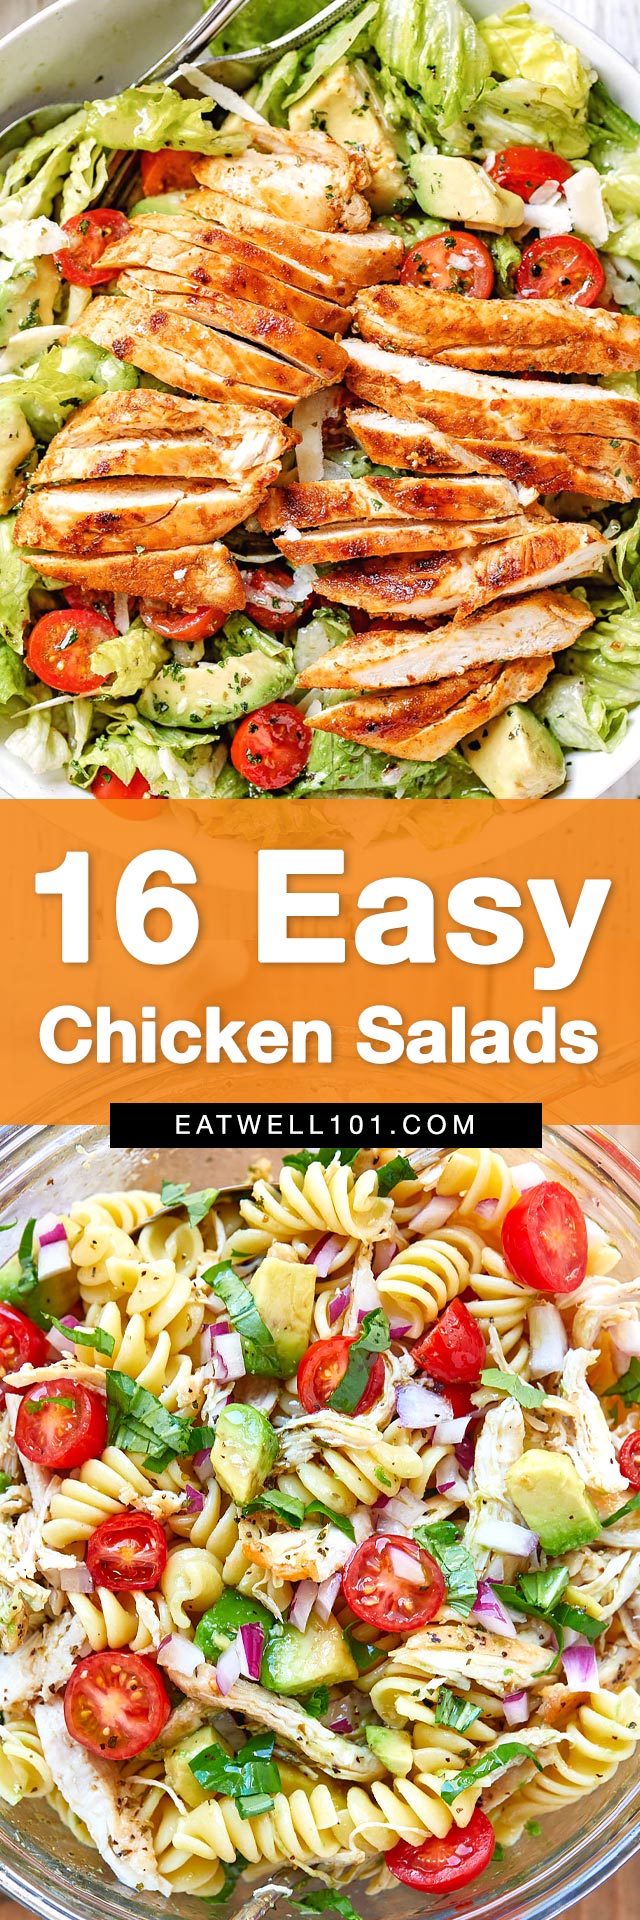 Chicken Salad Recipes - #chicken #salad #recipes #eatwell101 - These easy chicken salads are quick, easy, and satisfying!